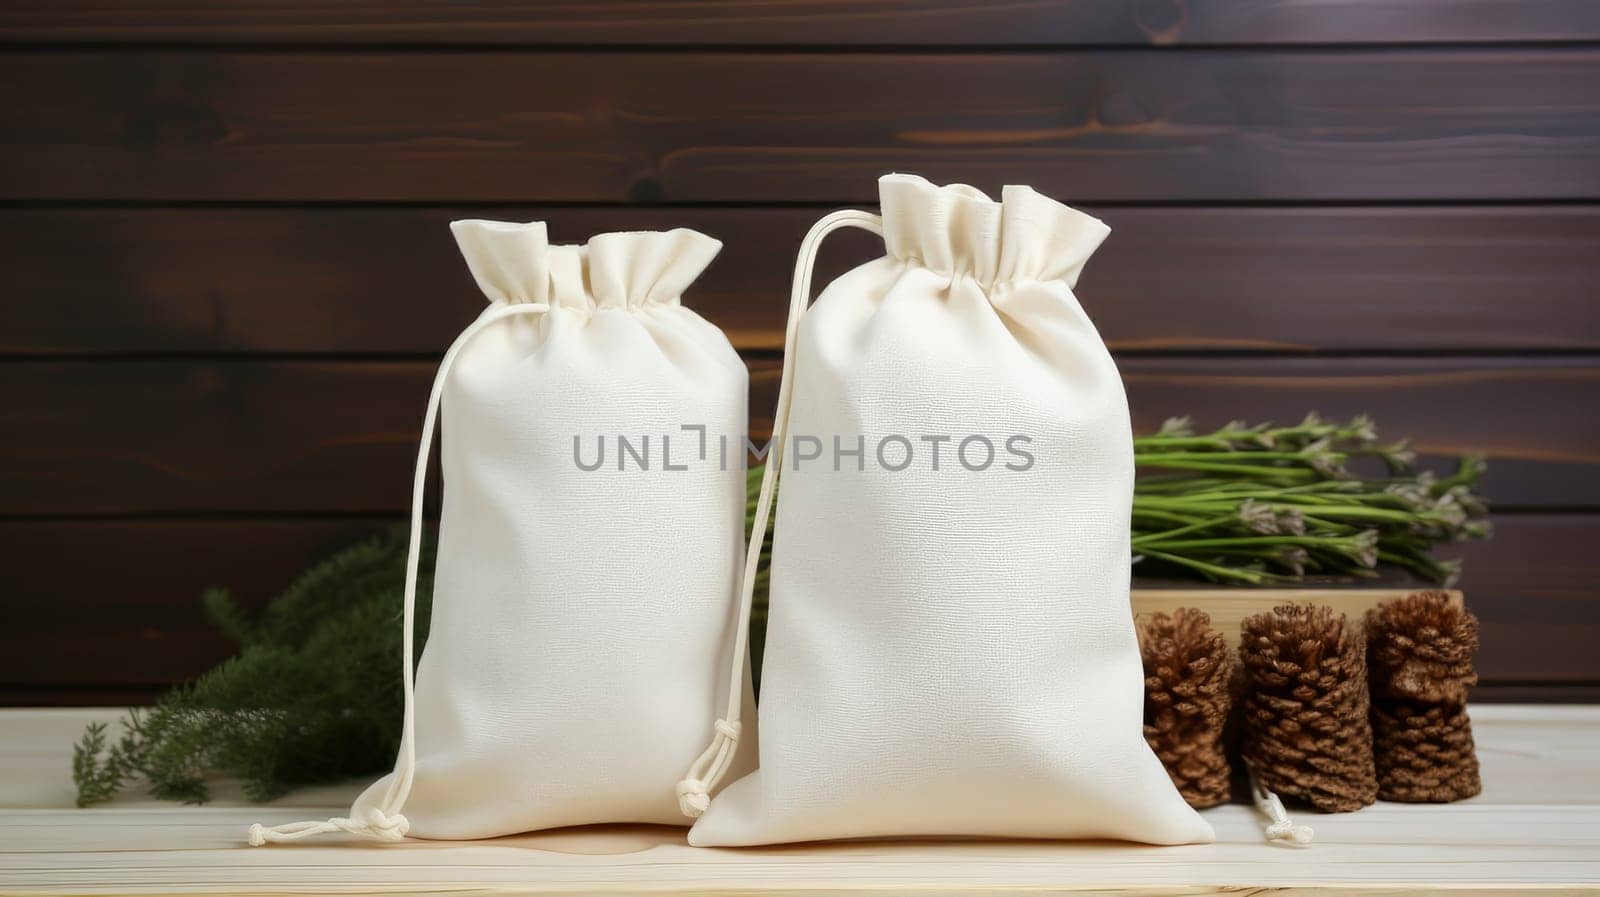 Light Fabric Bags Made of Natural Fabric. Recycling concept, excess consumption, Plastic free, linen fabric, wooden background, reusable, cereal bag, food, supplies, provisions